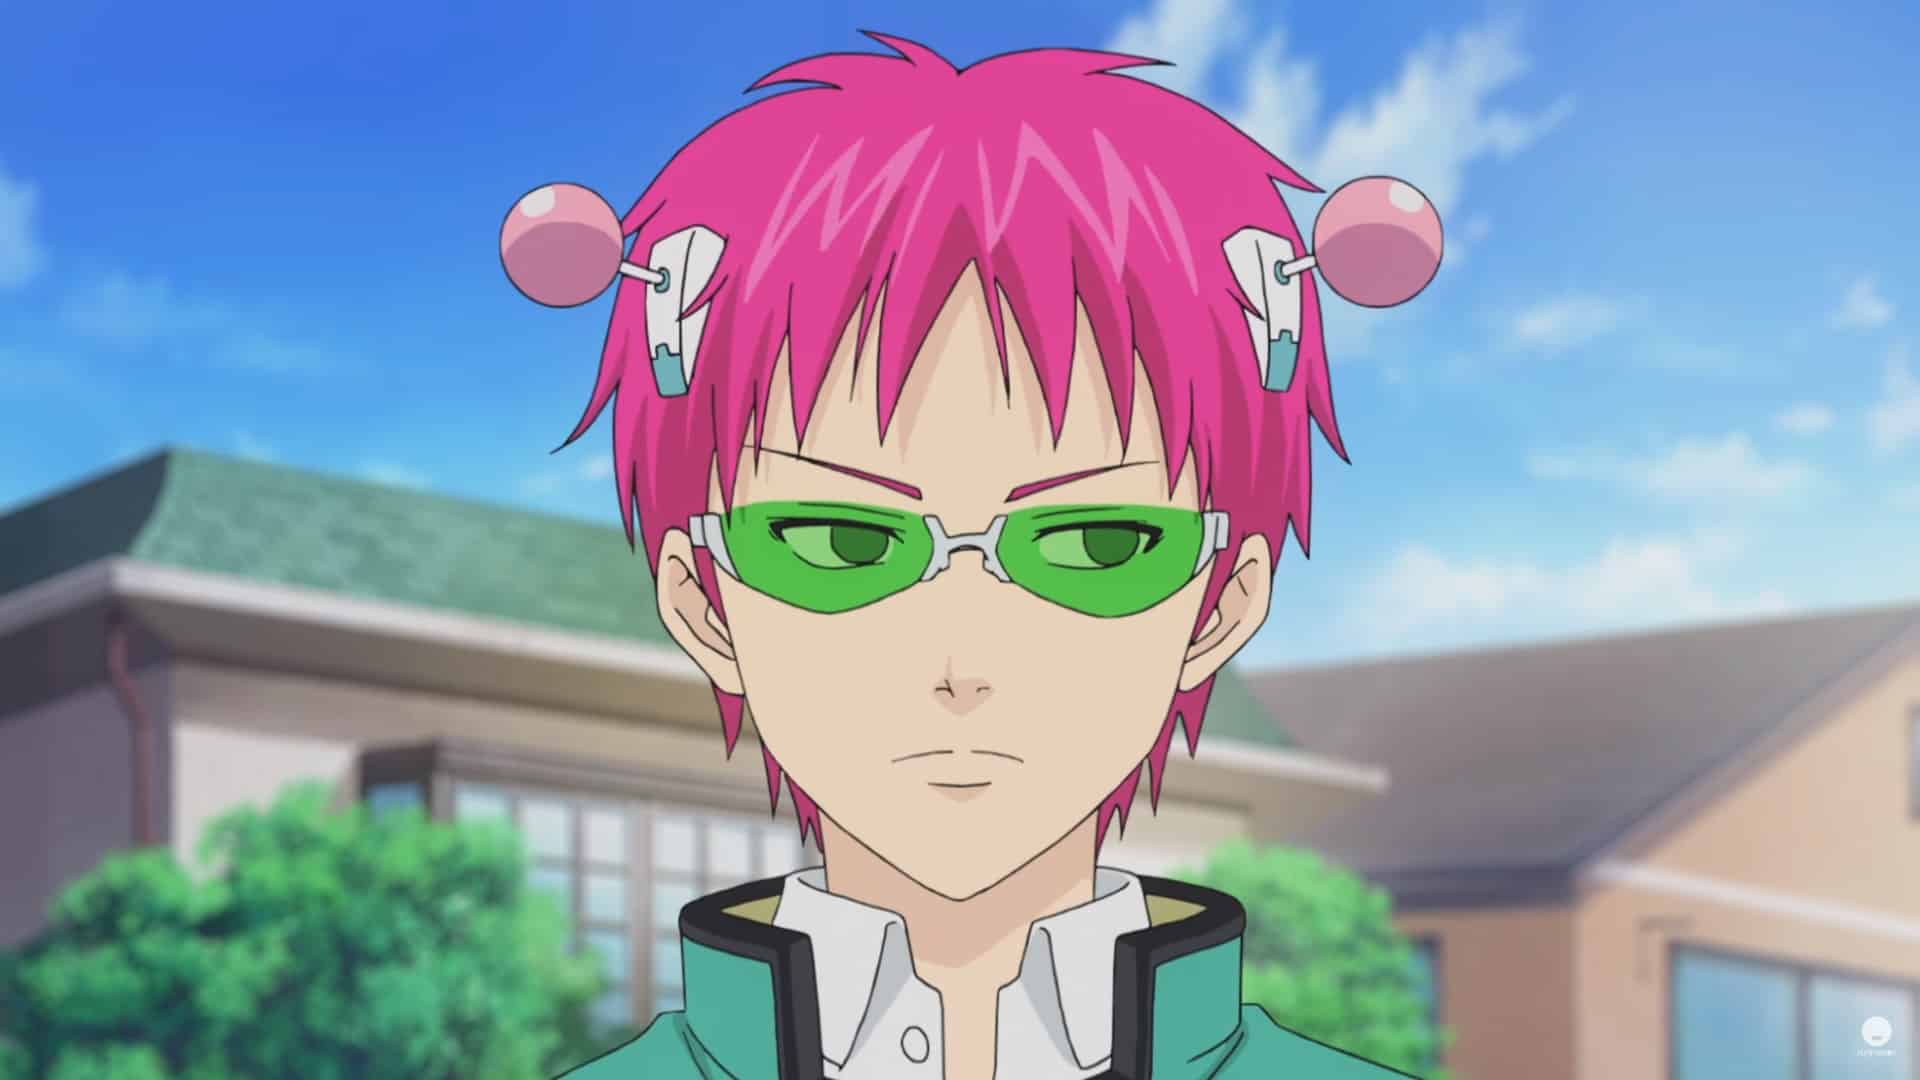 The Disastrous Life of Saiki K. will return with a new series in 2020 on  Netflix